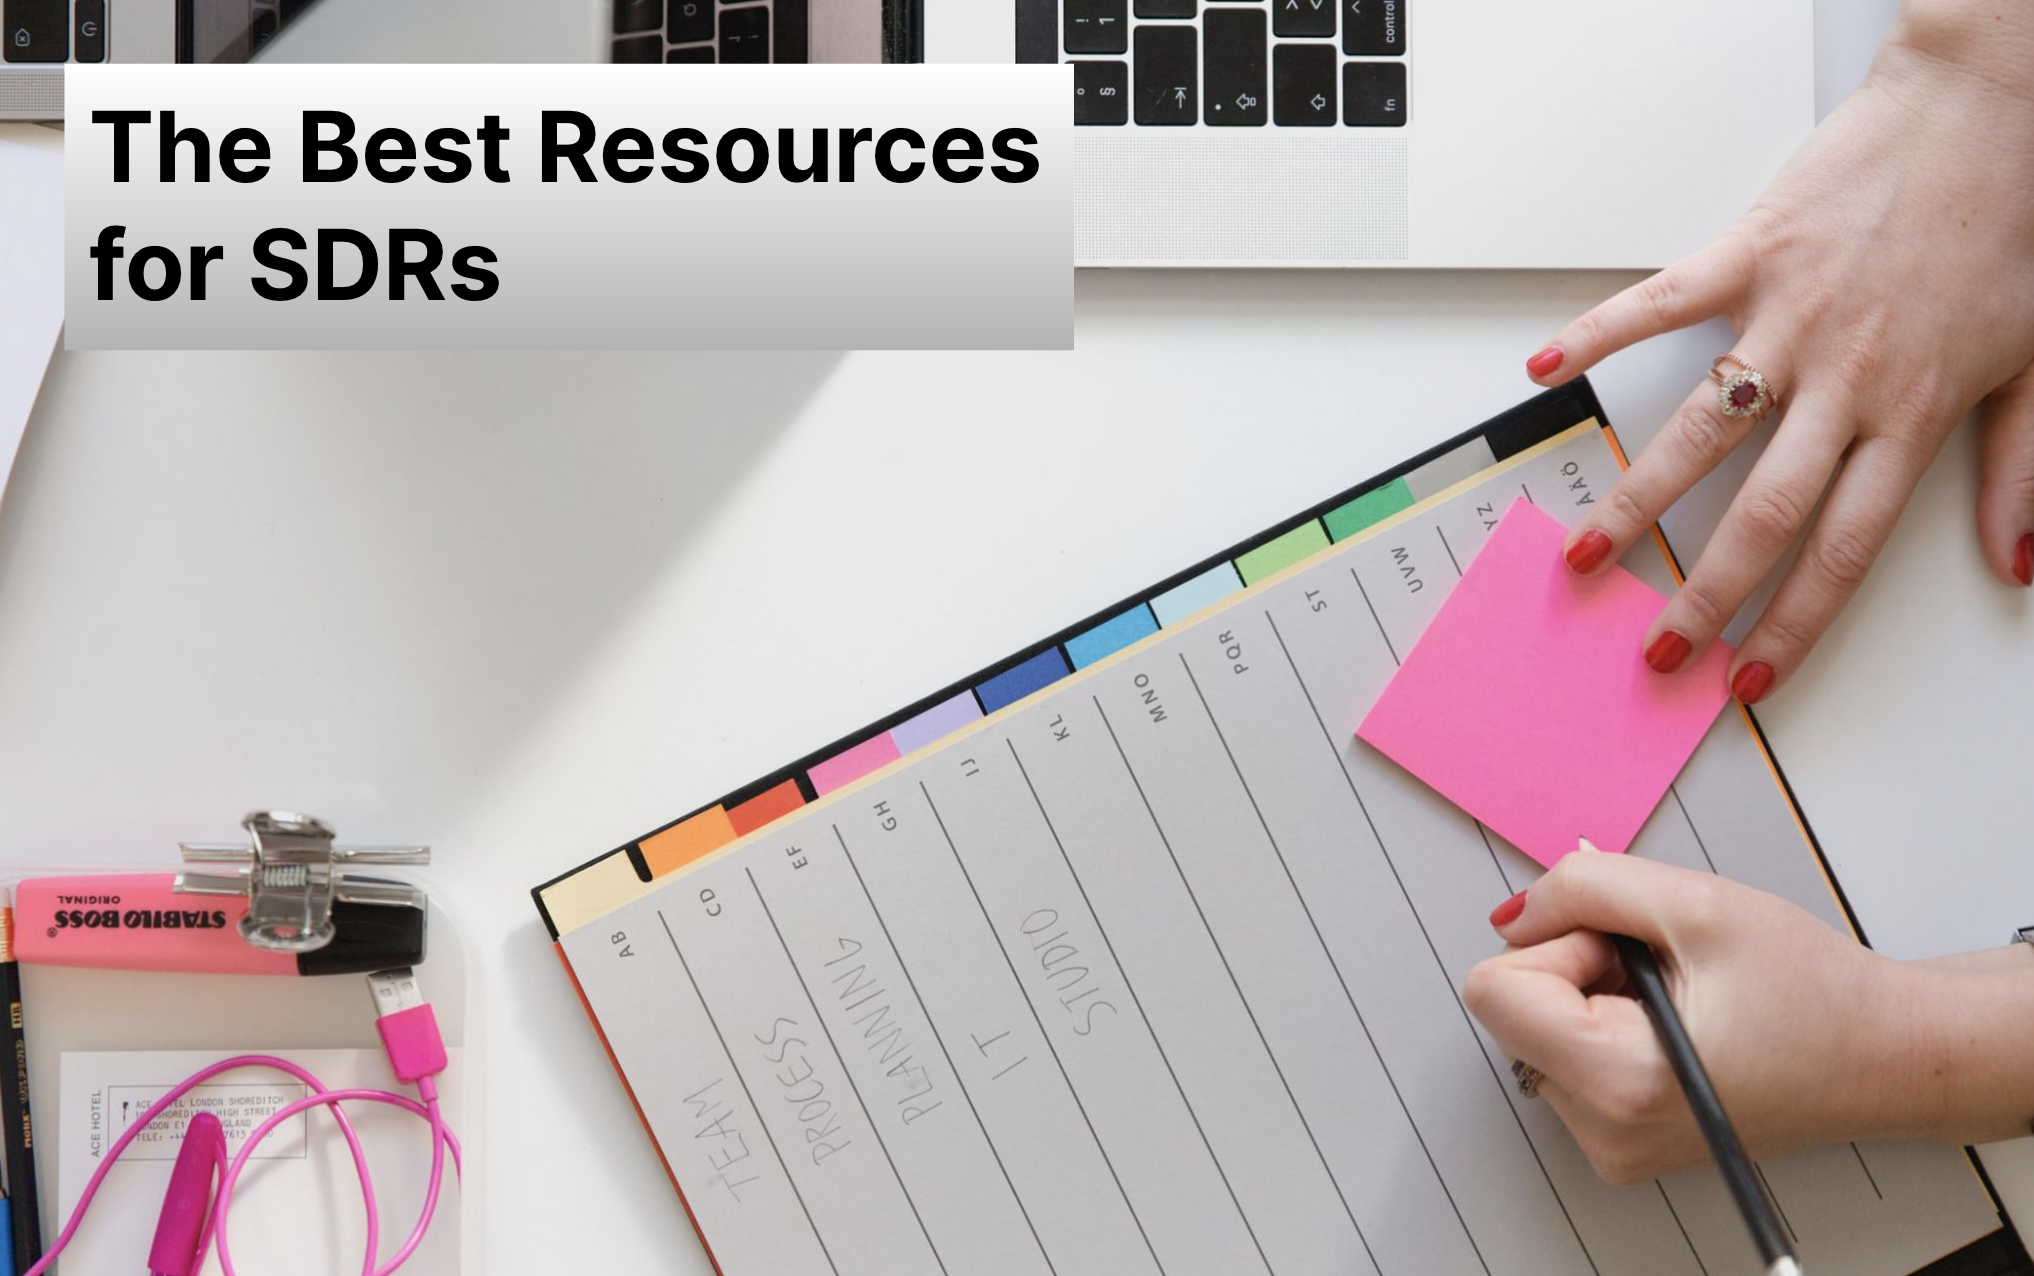 The Best Resources for SDRs